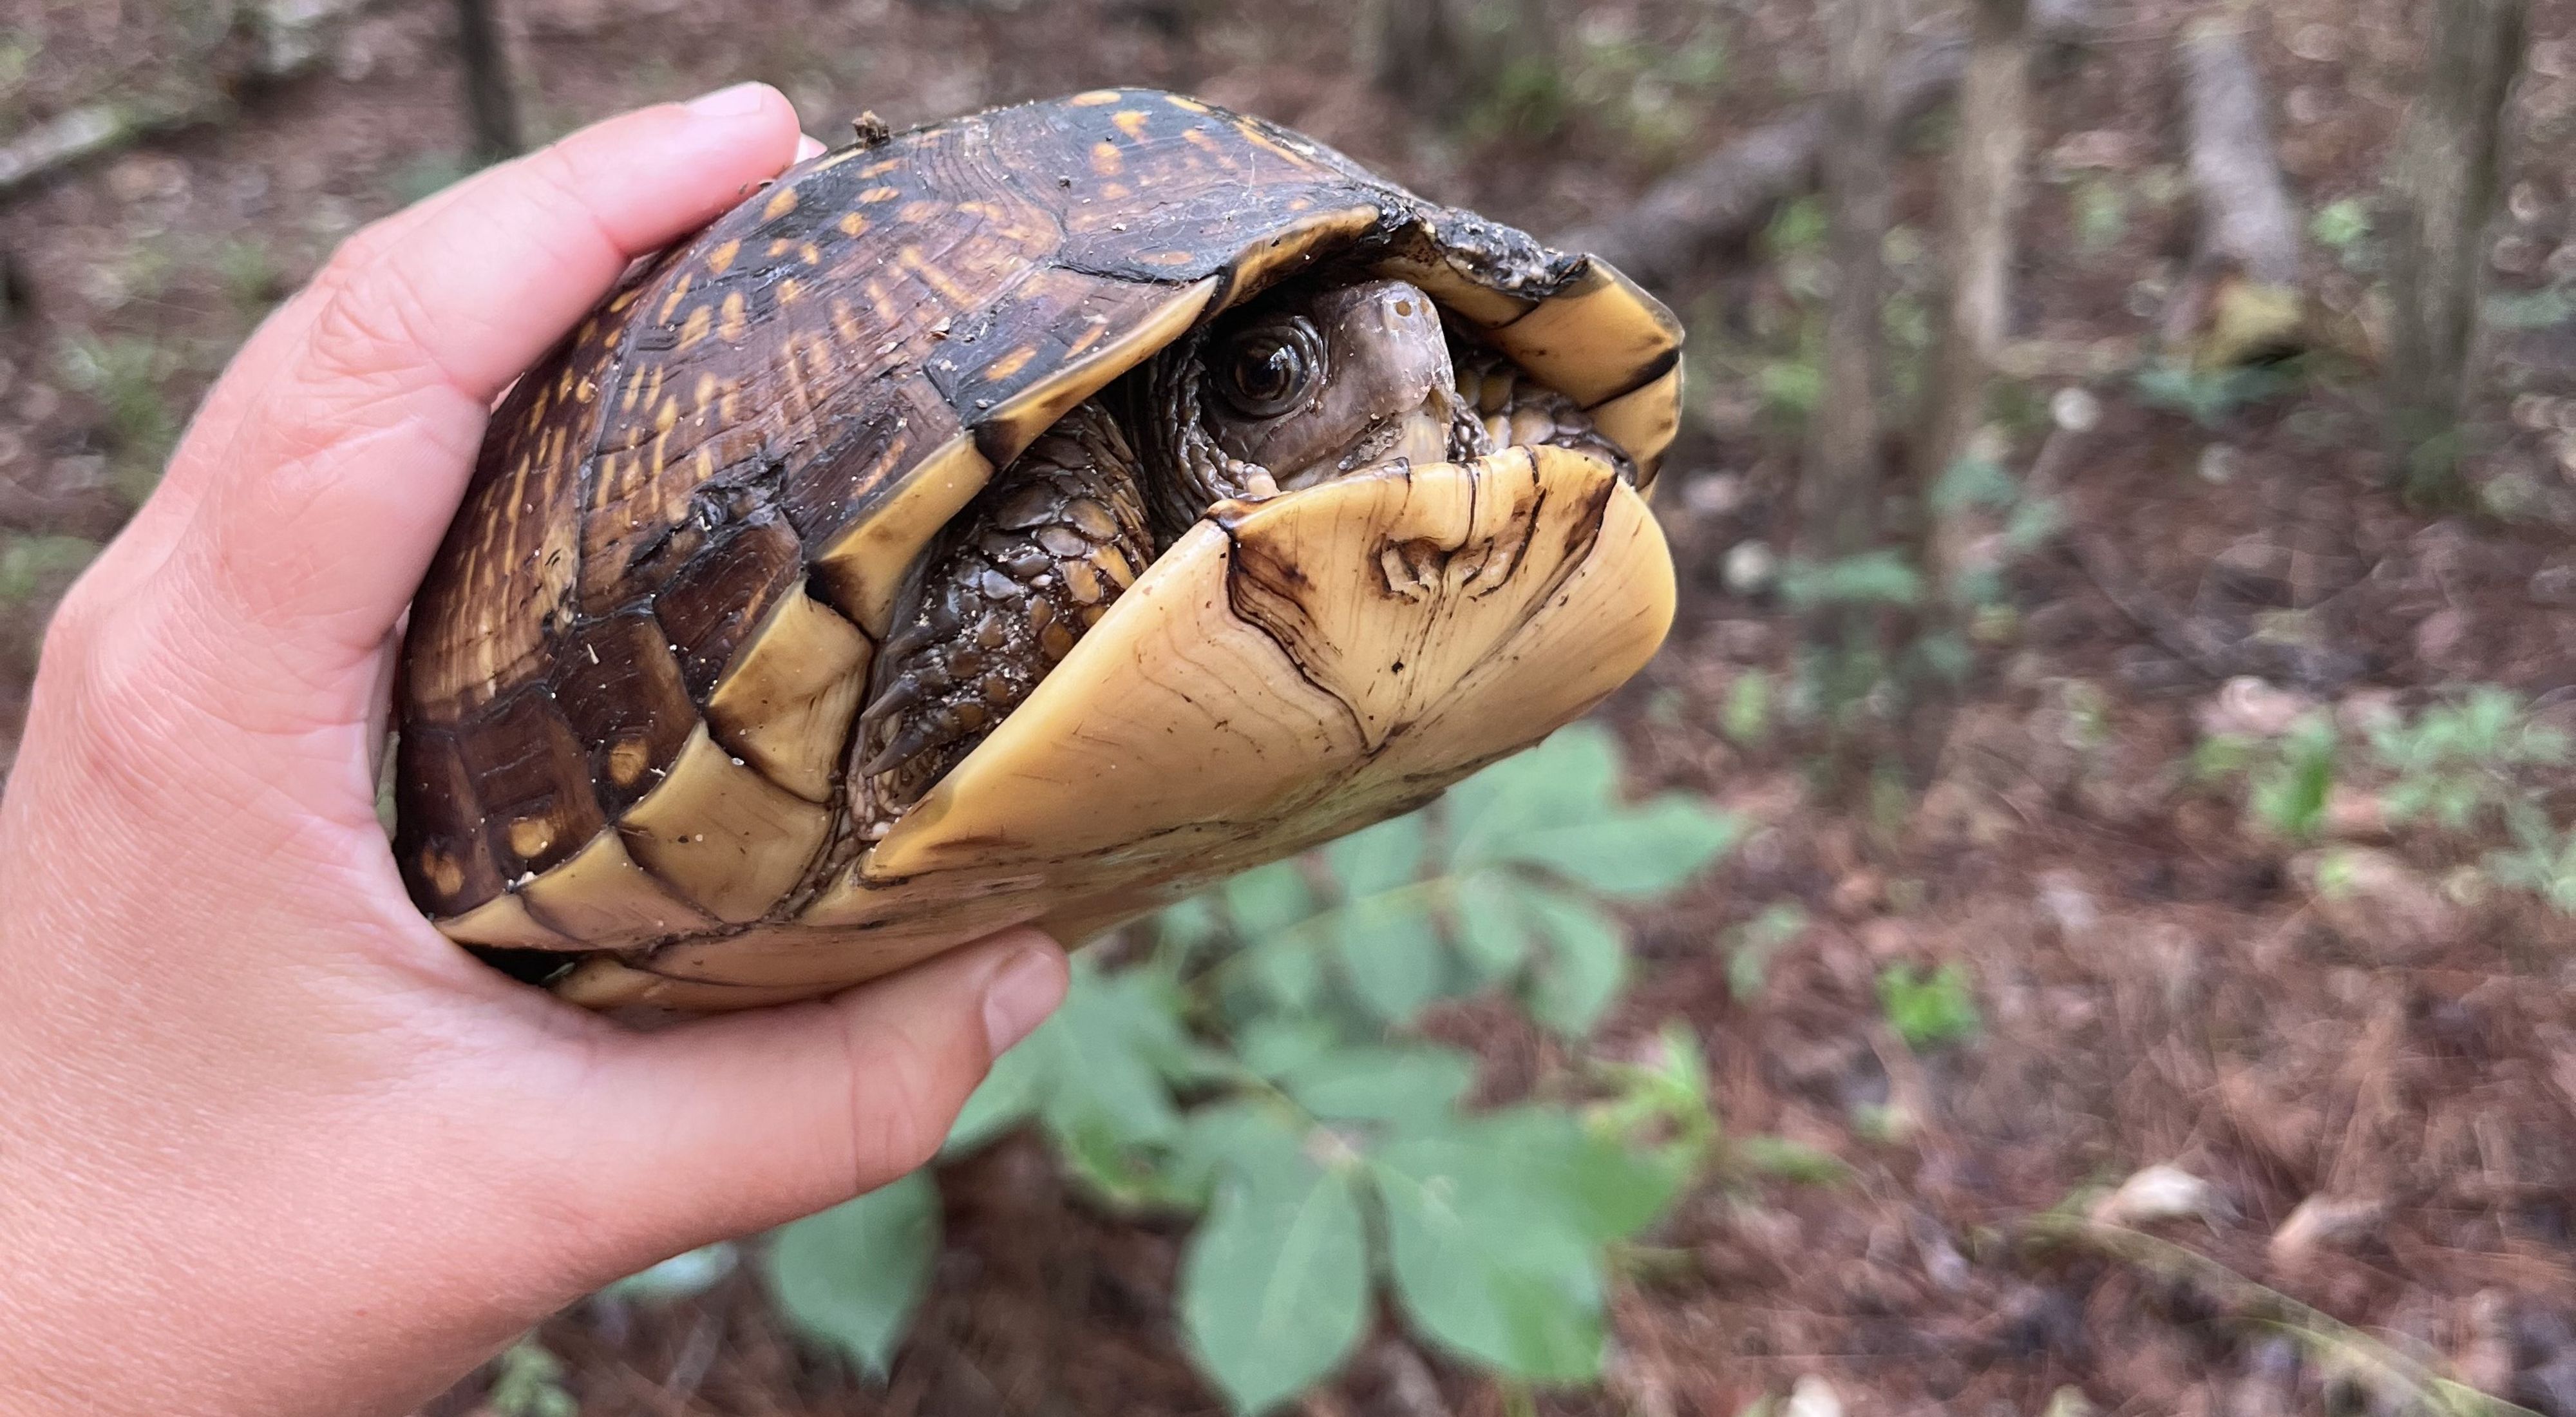 A hand holds a turtle that has retracted into its shell.